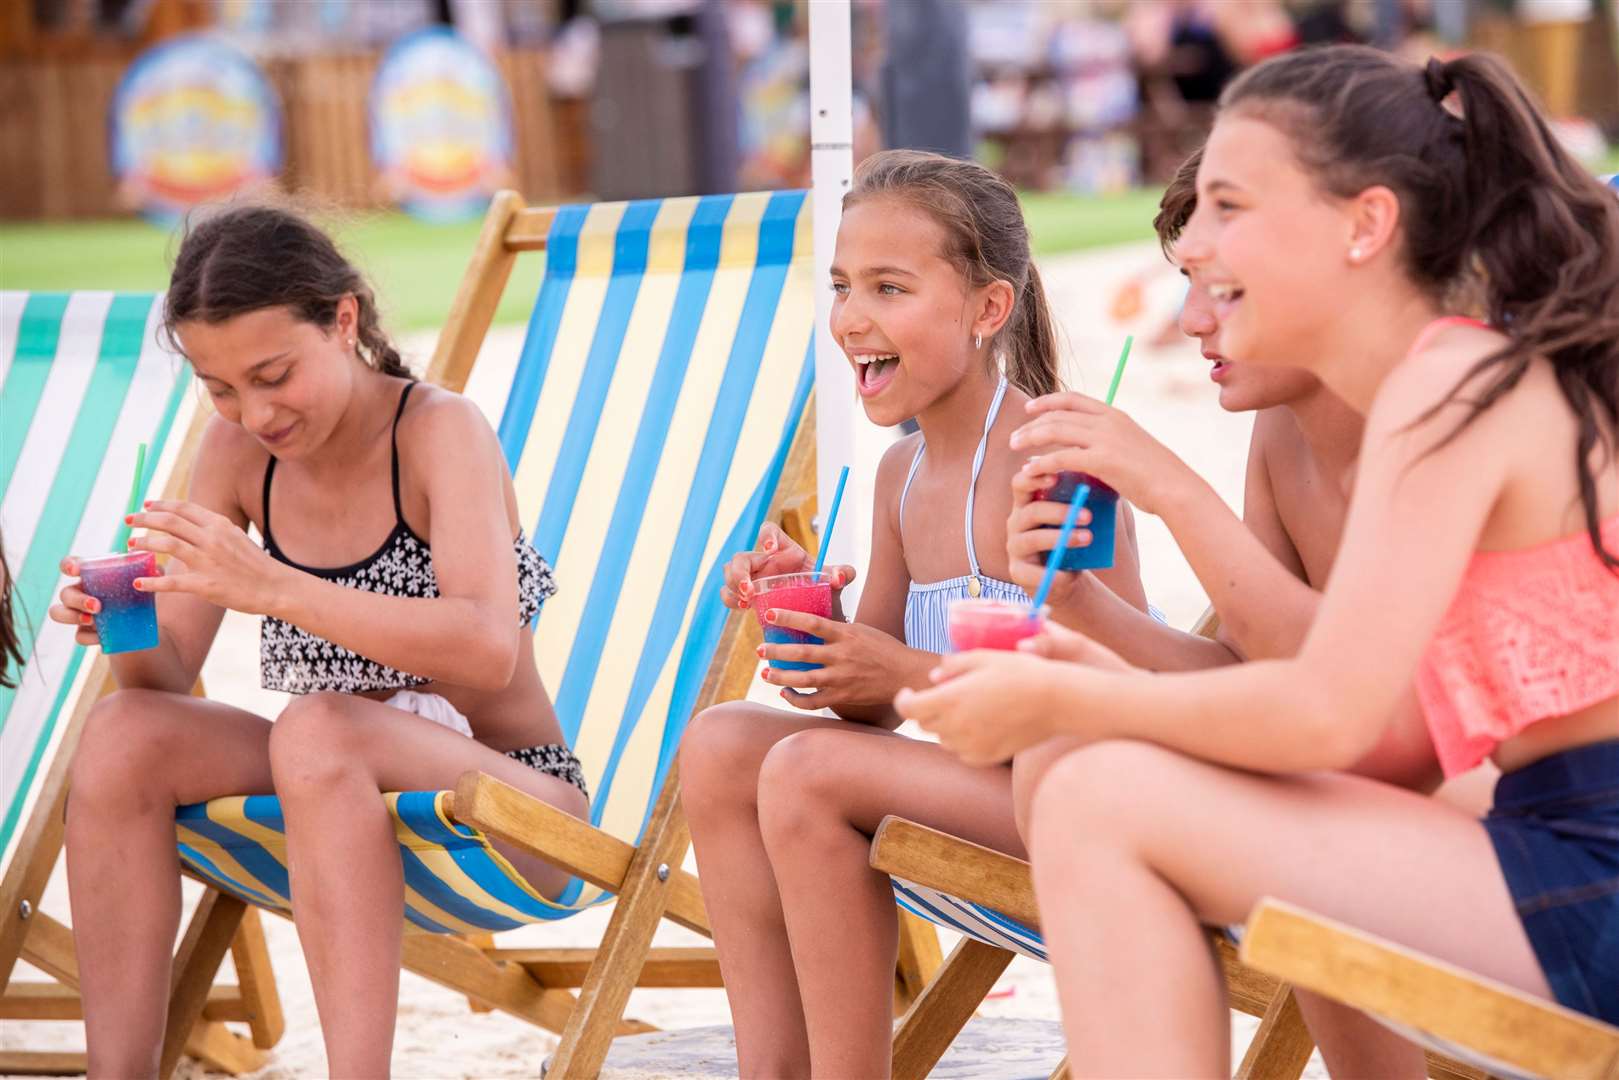 The Beach at Bluewater is back for the summer